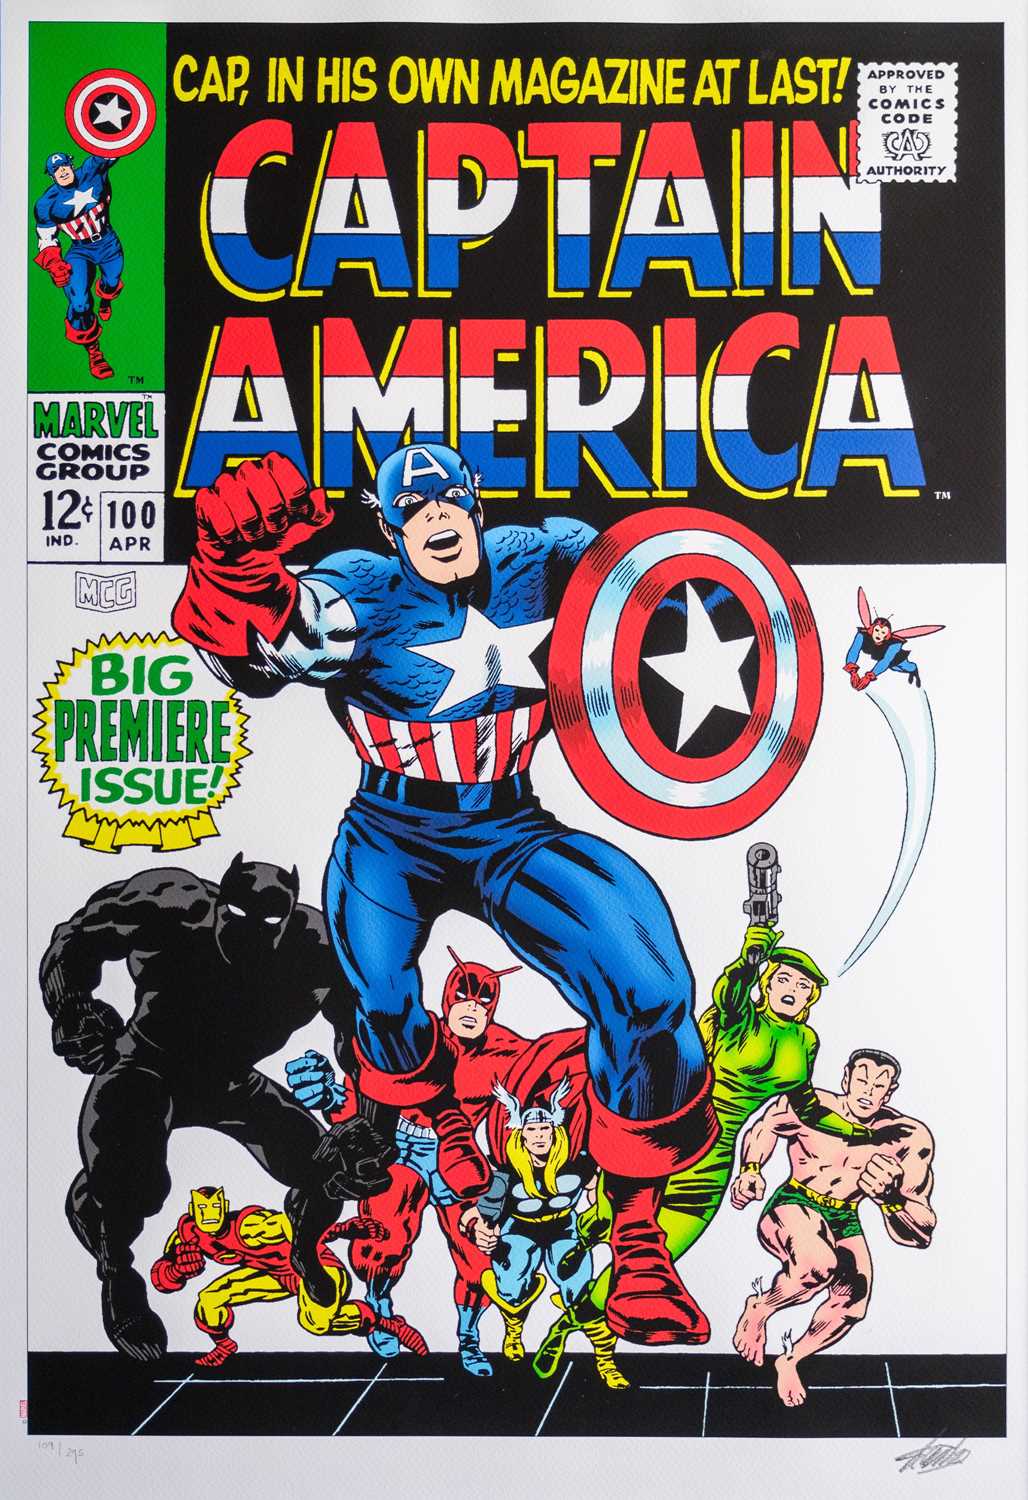 (Signed) Stan LEE (1922-2018) Captain America #100 - Big Premiere Issue!